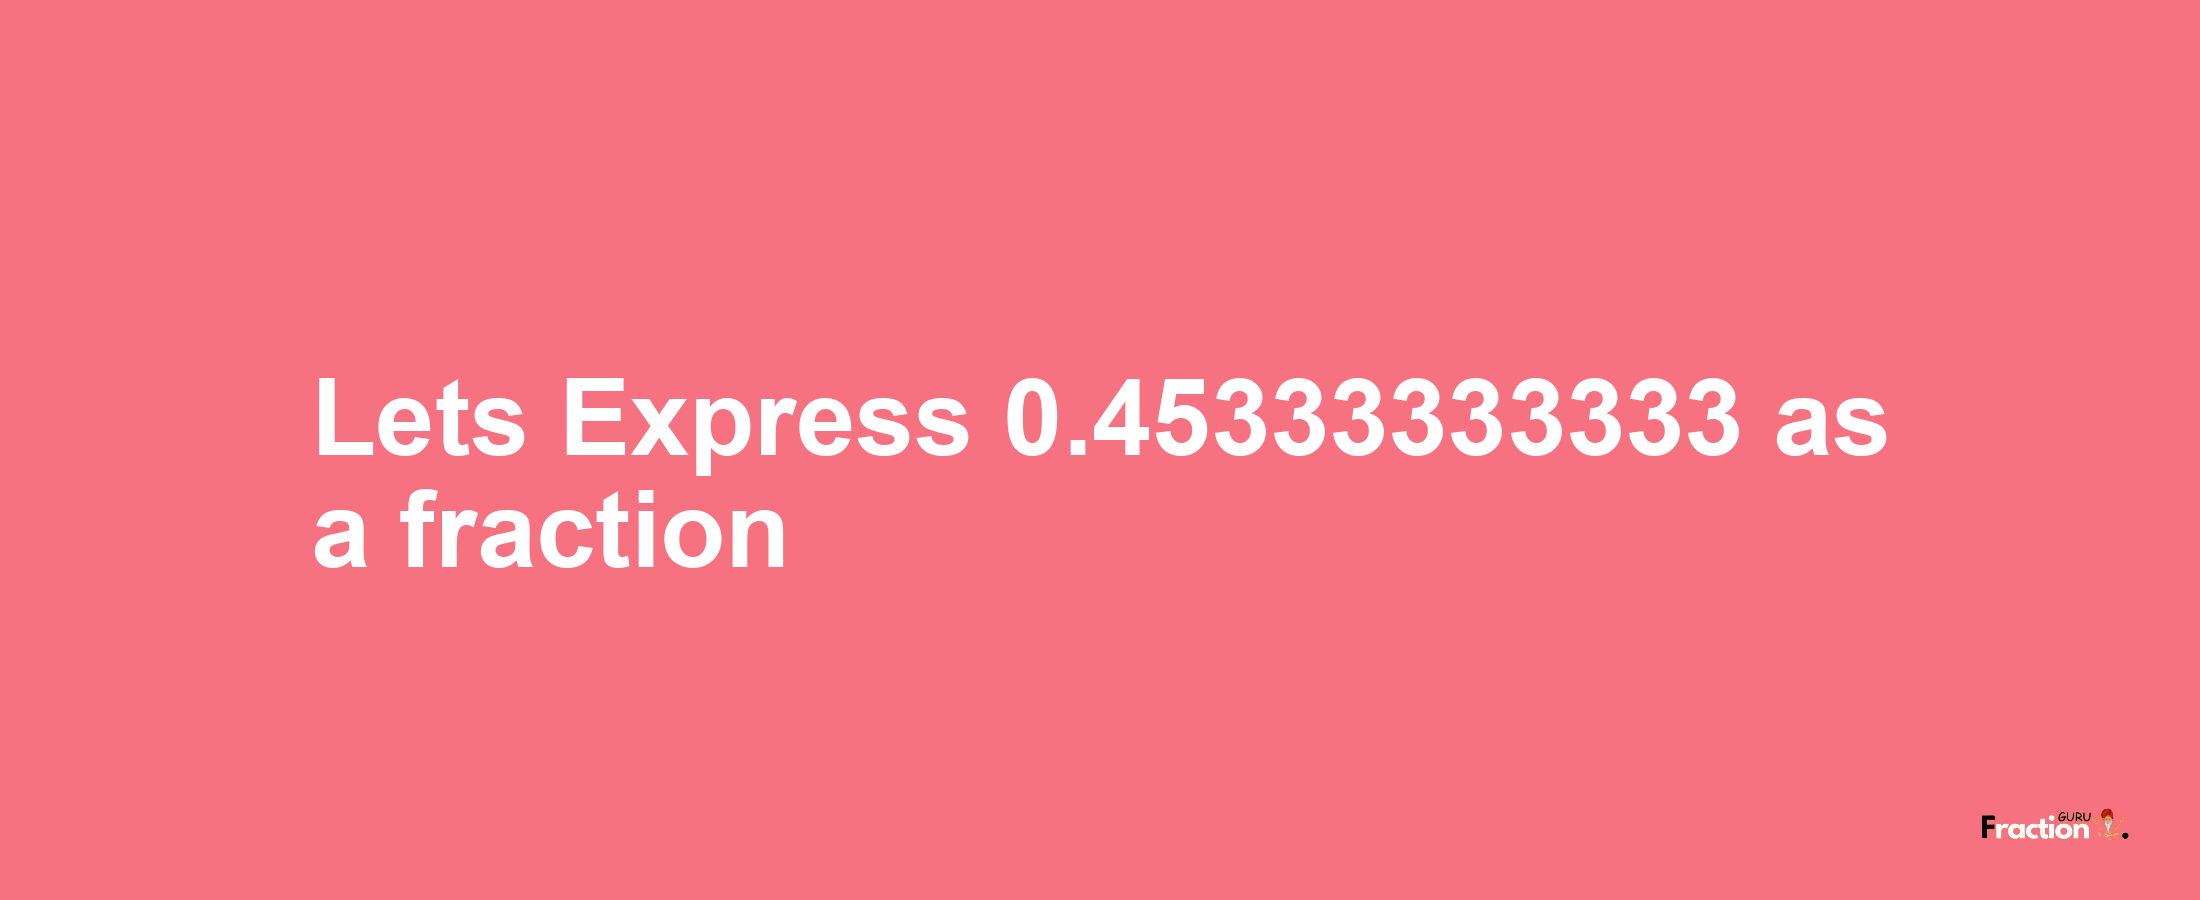 Lets Express 0.45333333333 as afraction